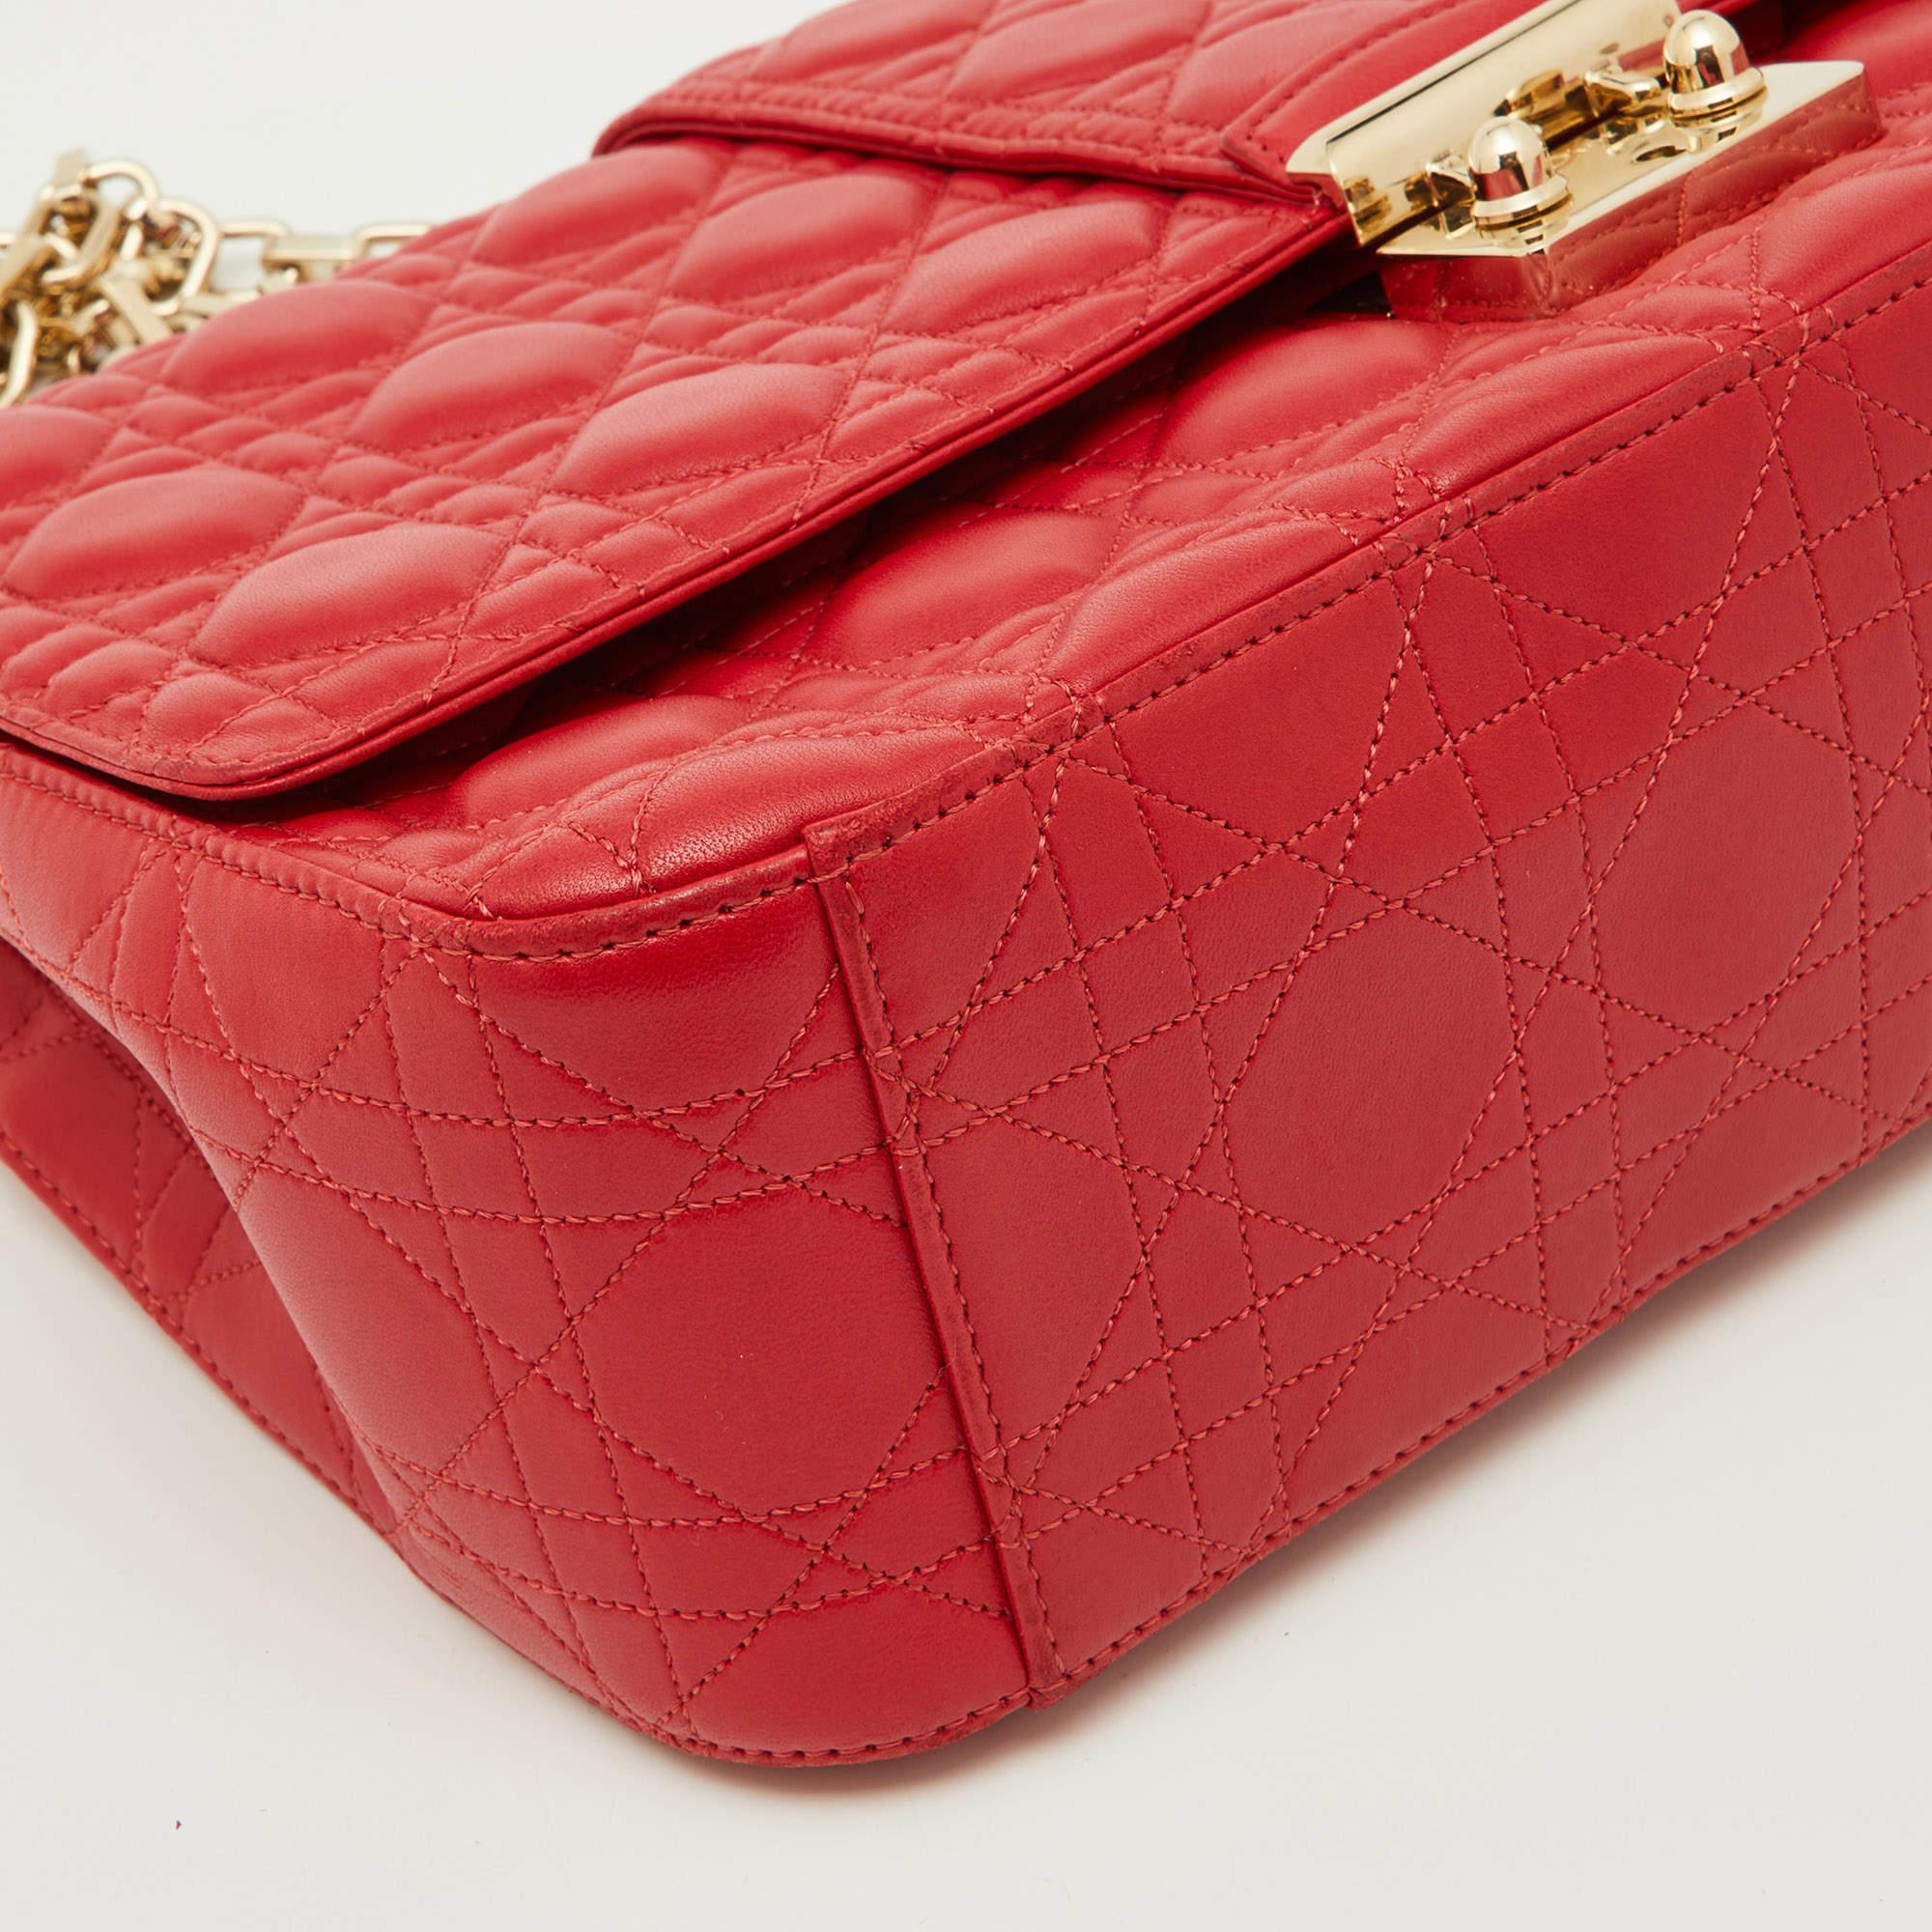 Dior Red Cannage Leather Large Miss Dior Shoulder Bag In Good Condition For Sale In Dubai, Al Qouz 2